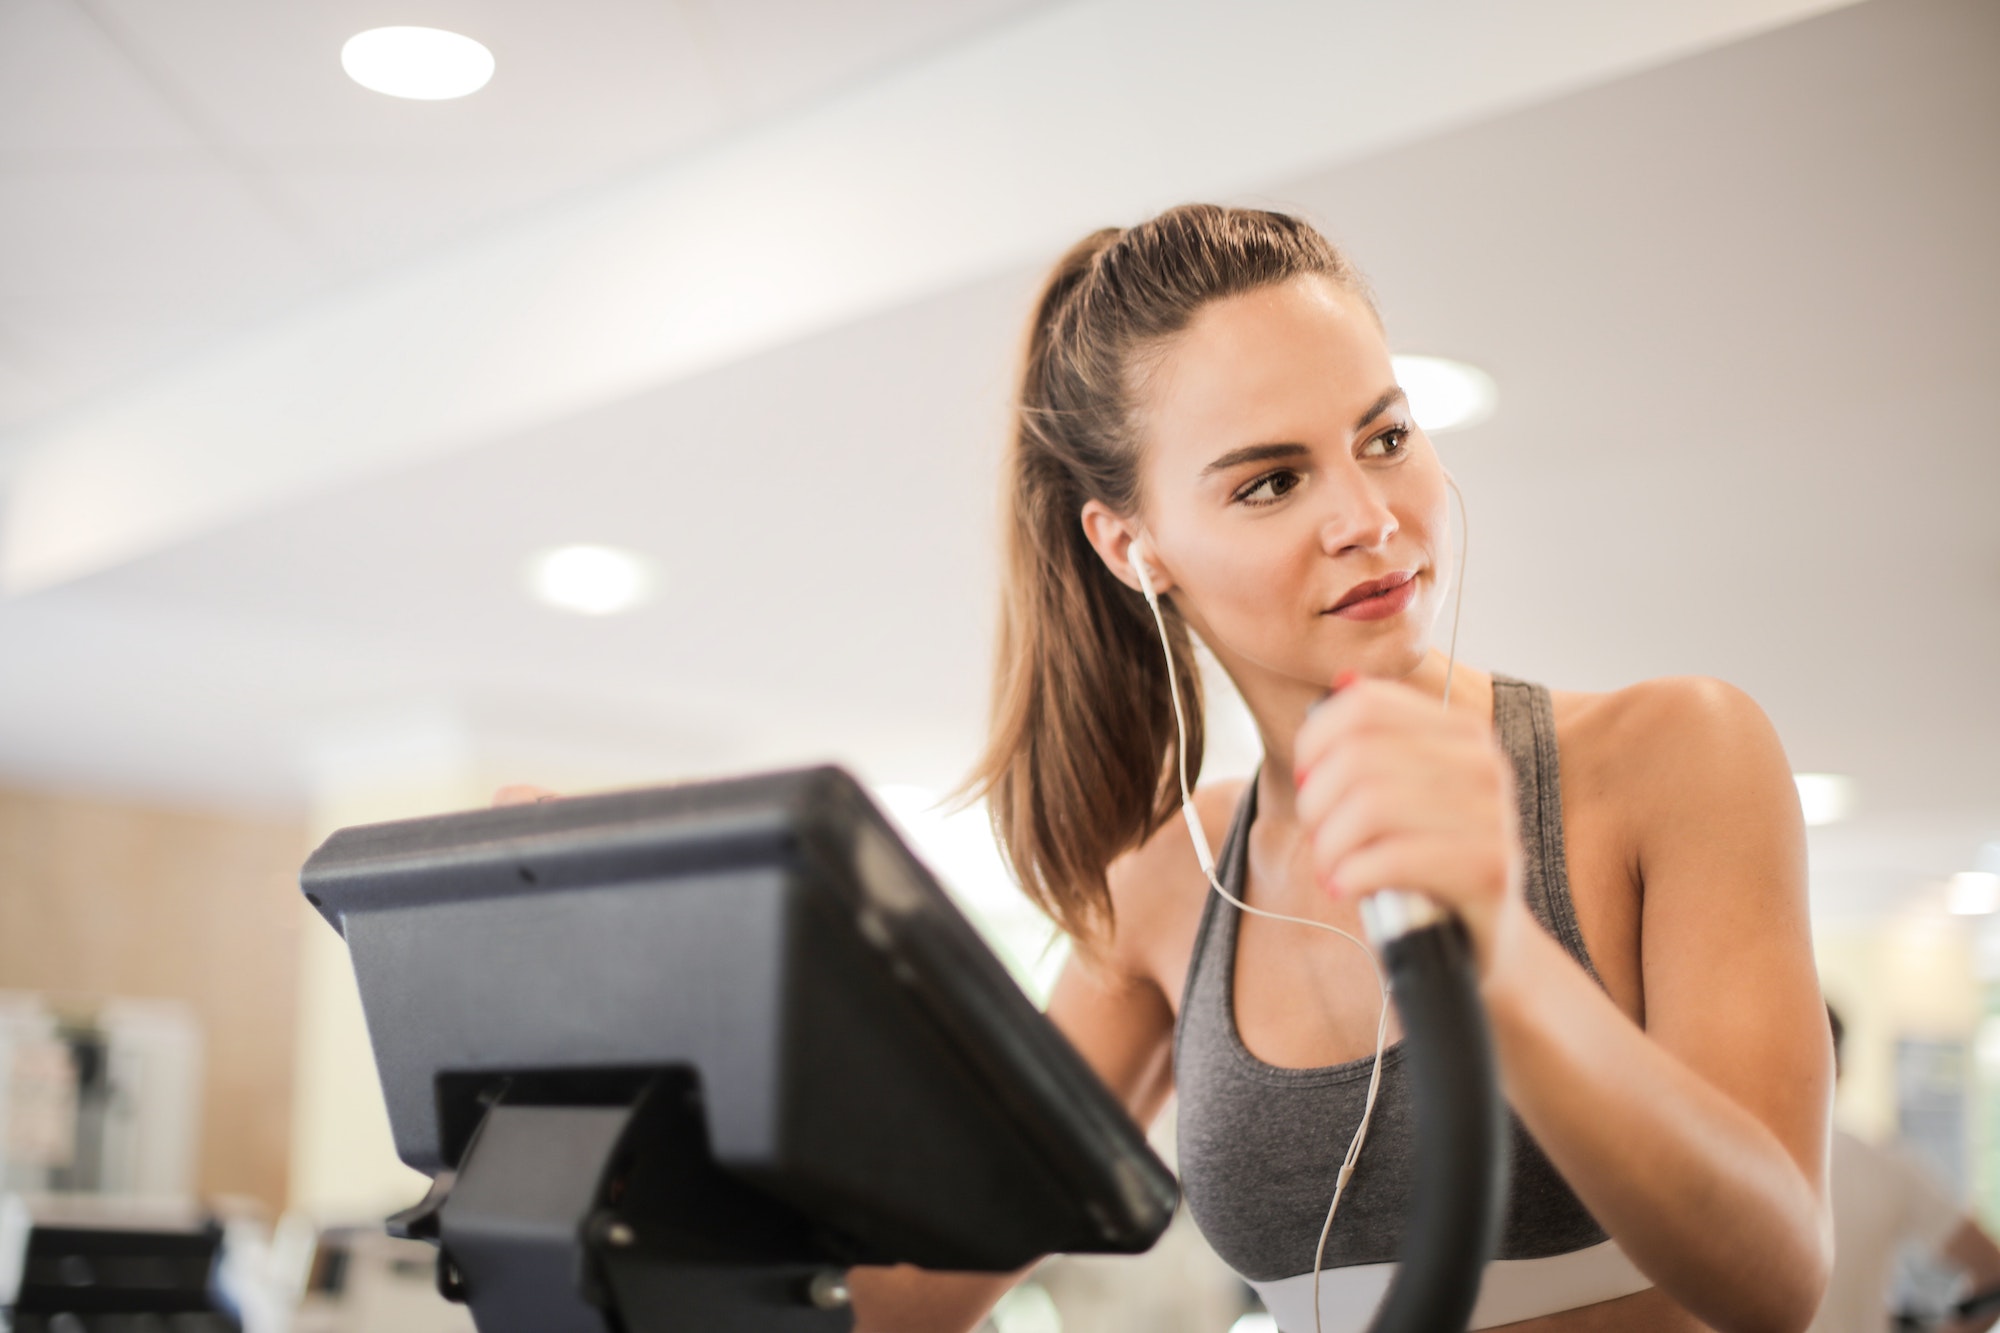 Incorporate The Elliptical Machine To Your Weightloss Routine